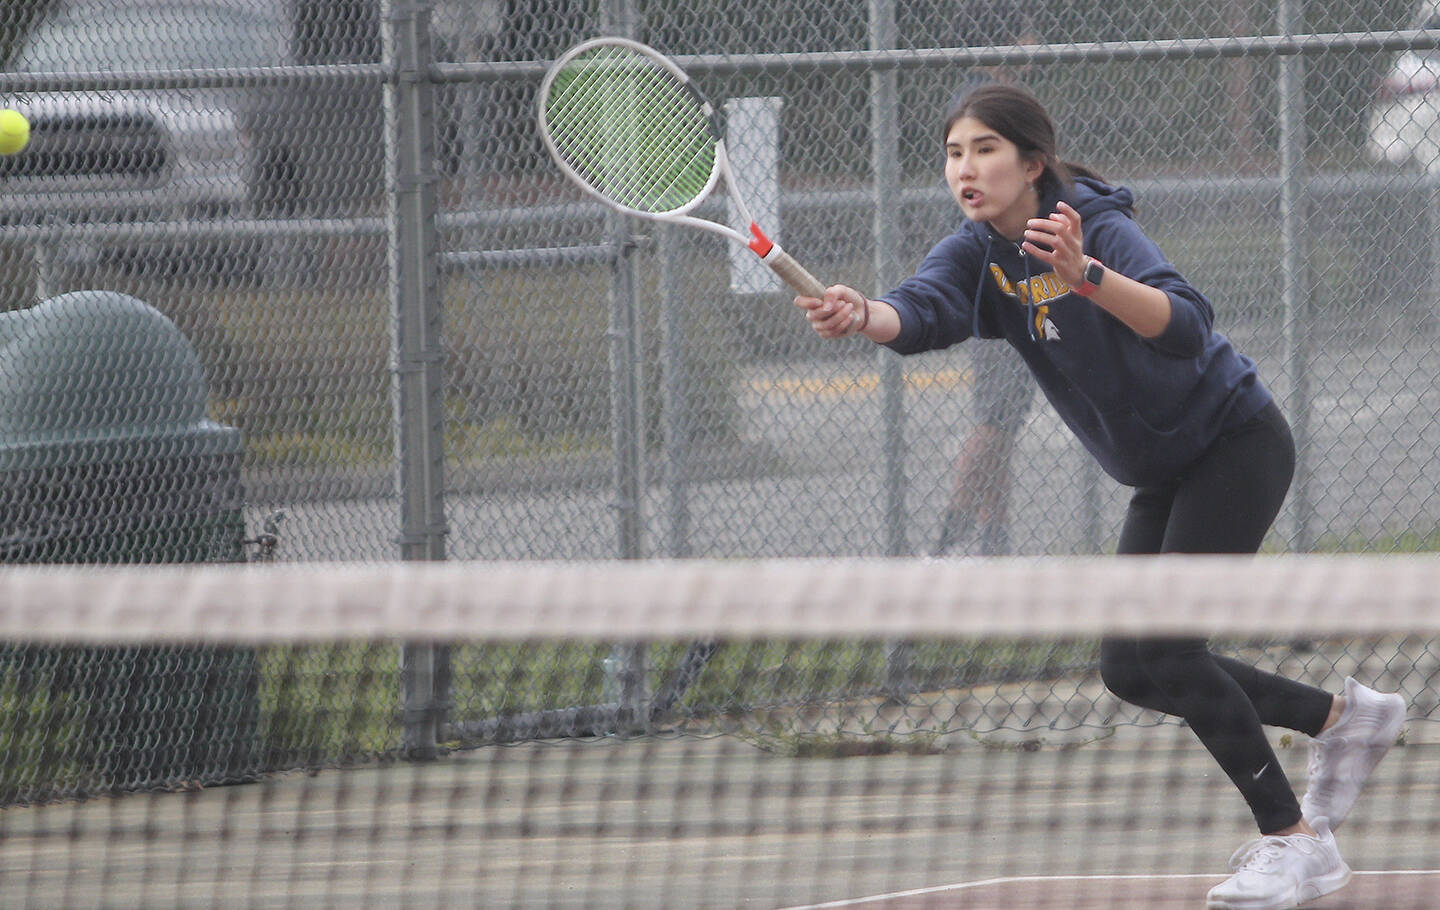 Aya Gatto smashes a forehand down the line against the Bucs.